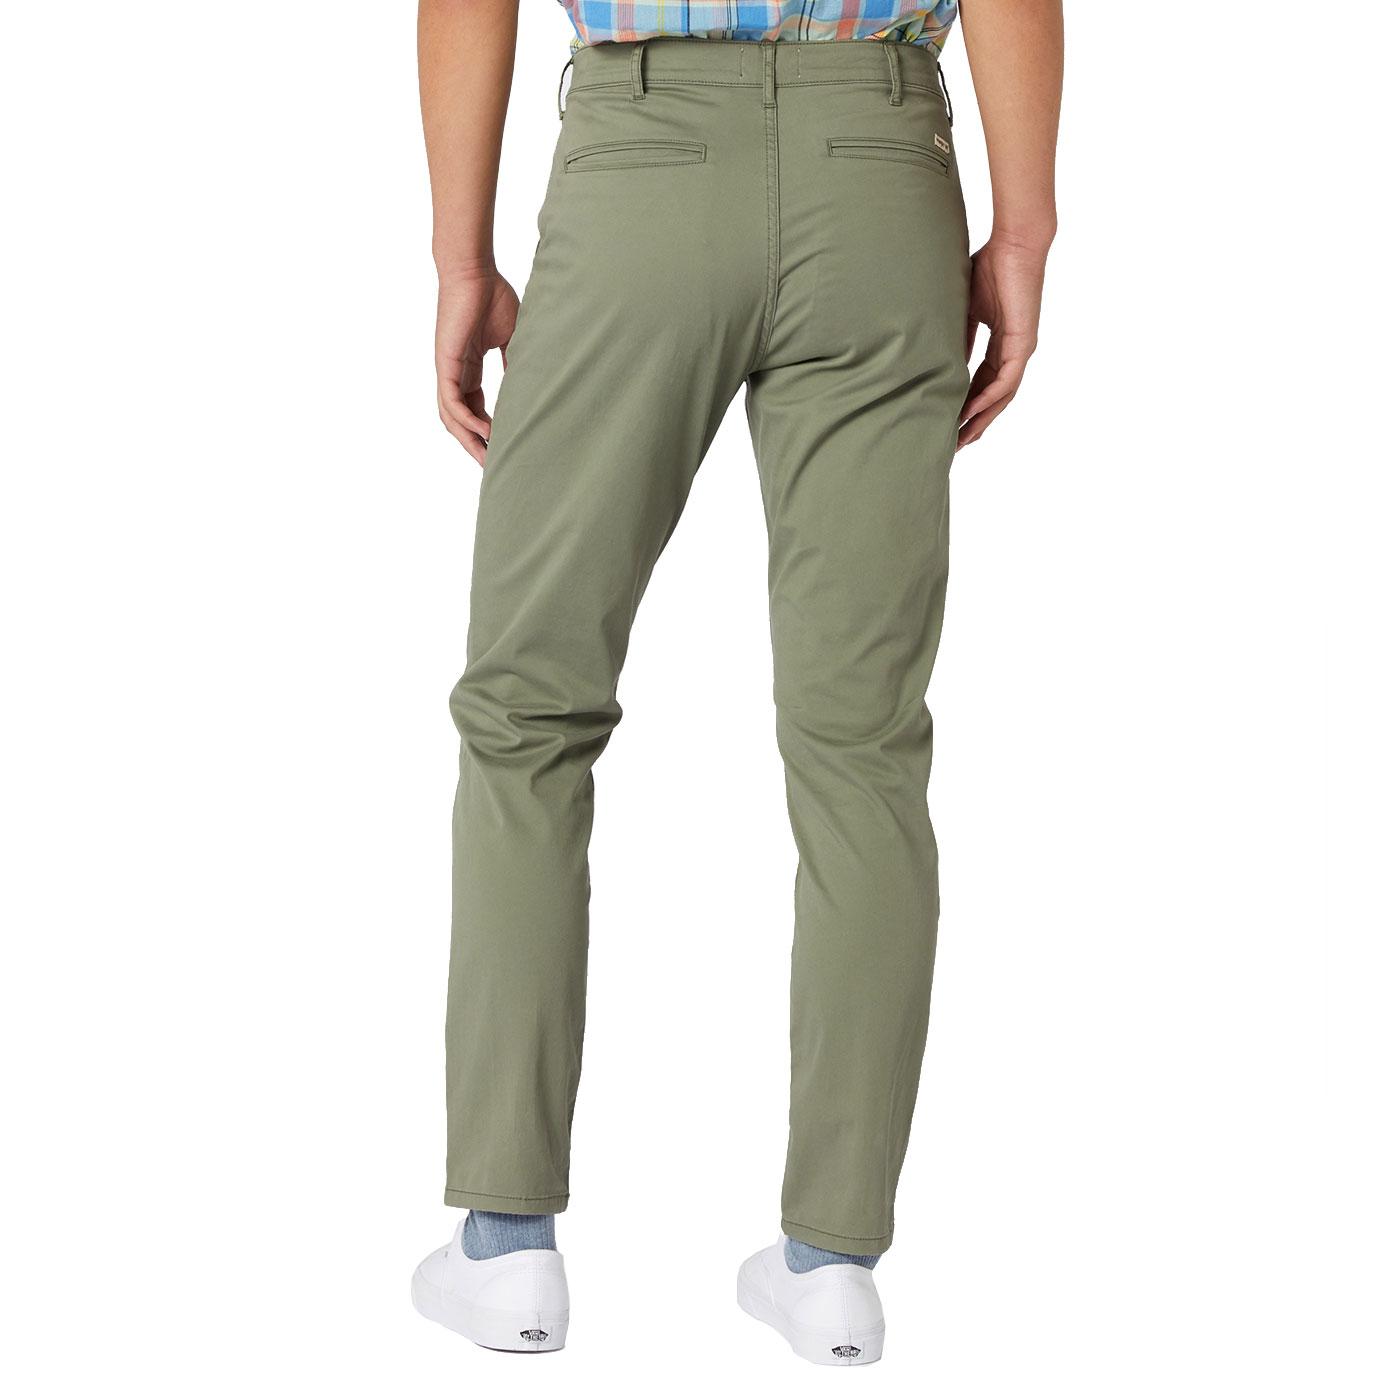 WRANGLER Retro Casual Cotton Twill Chinos in Dusty Olive